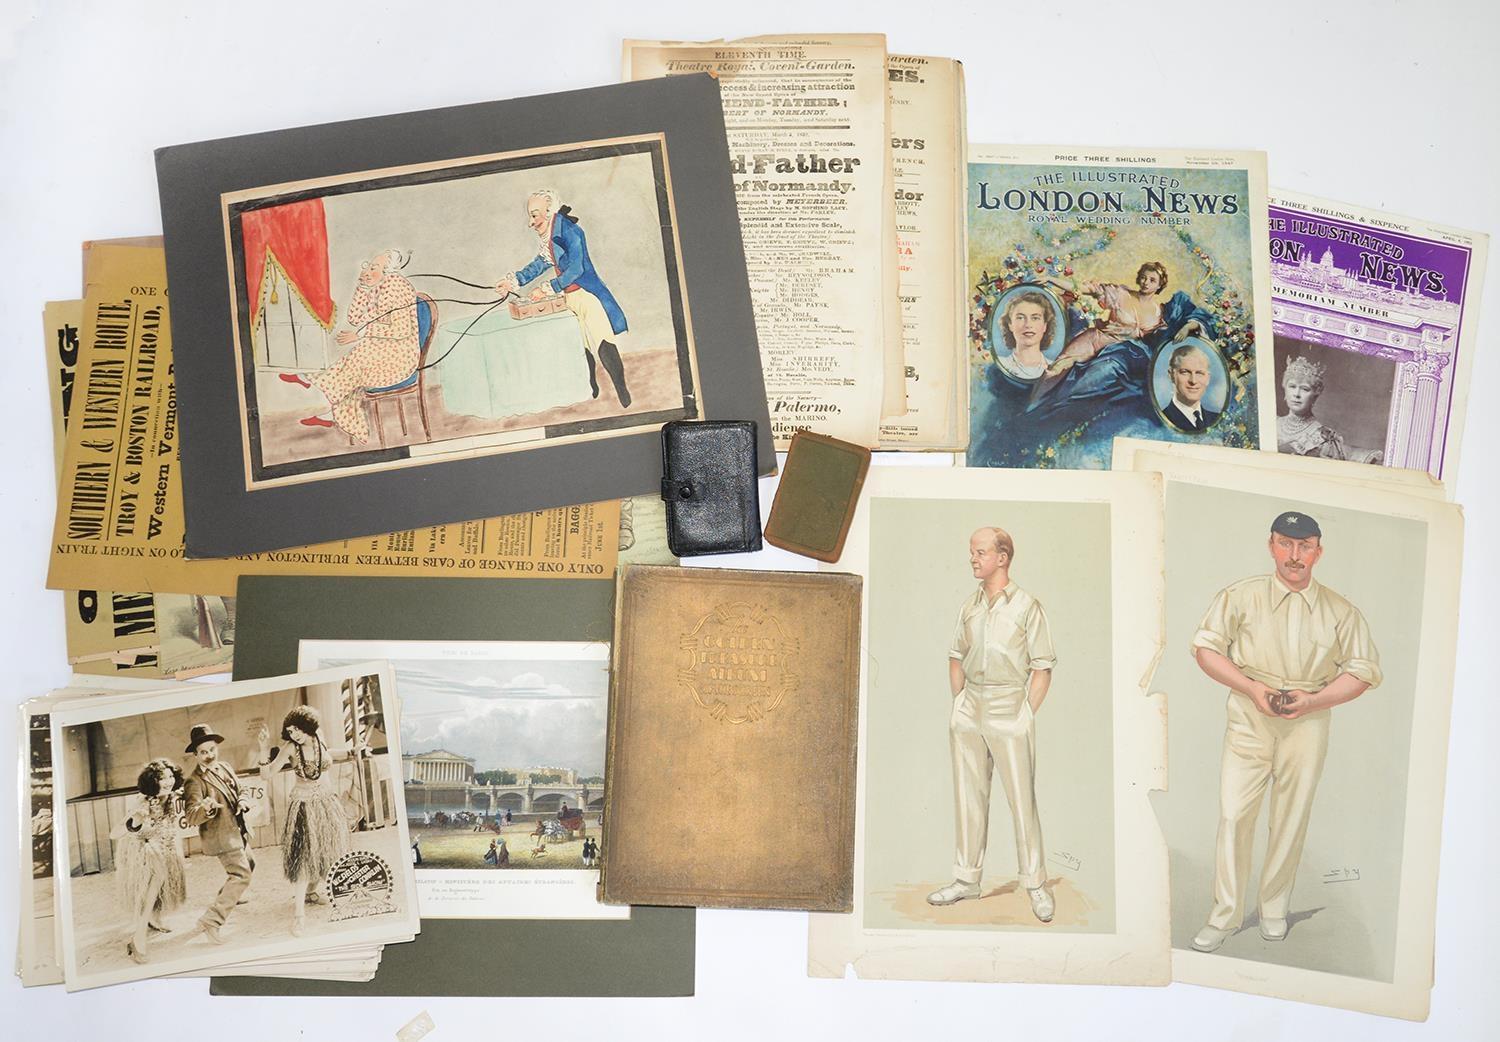 A SMALL COLLECTION OF PRINTED EPHEMERA, INCLUDING FILM STILLS, ILLUSTRATED LONDON NEWS SPECIAL